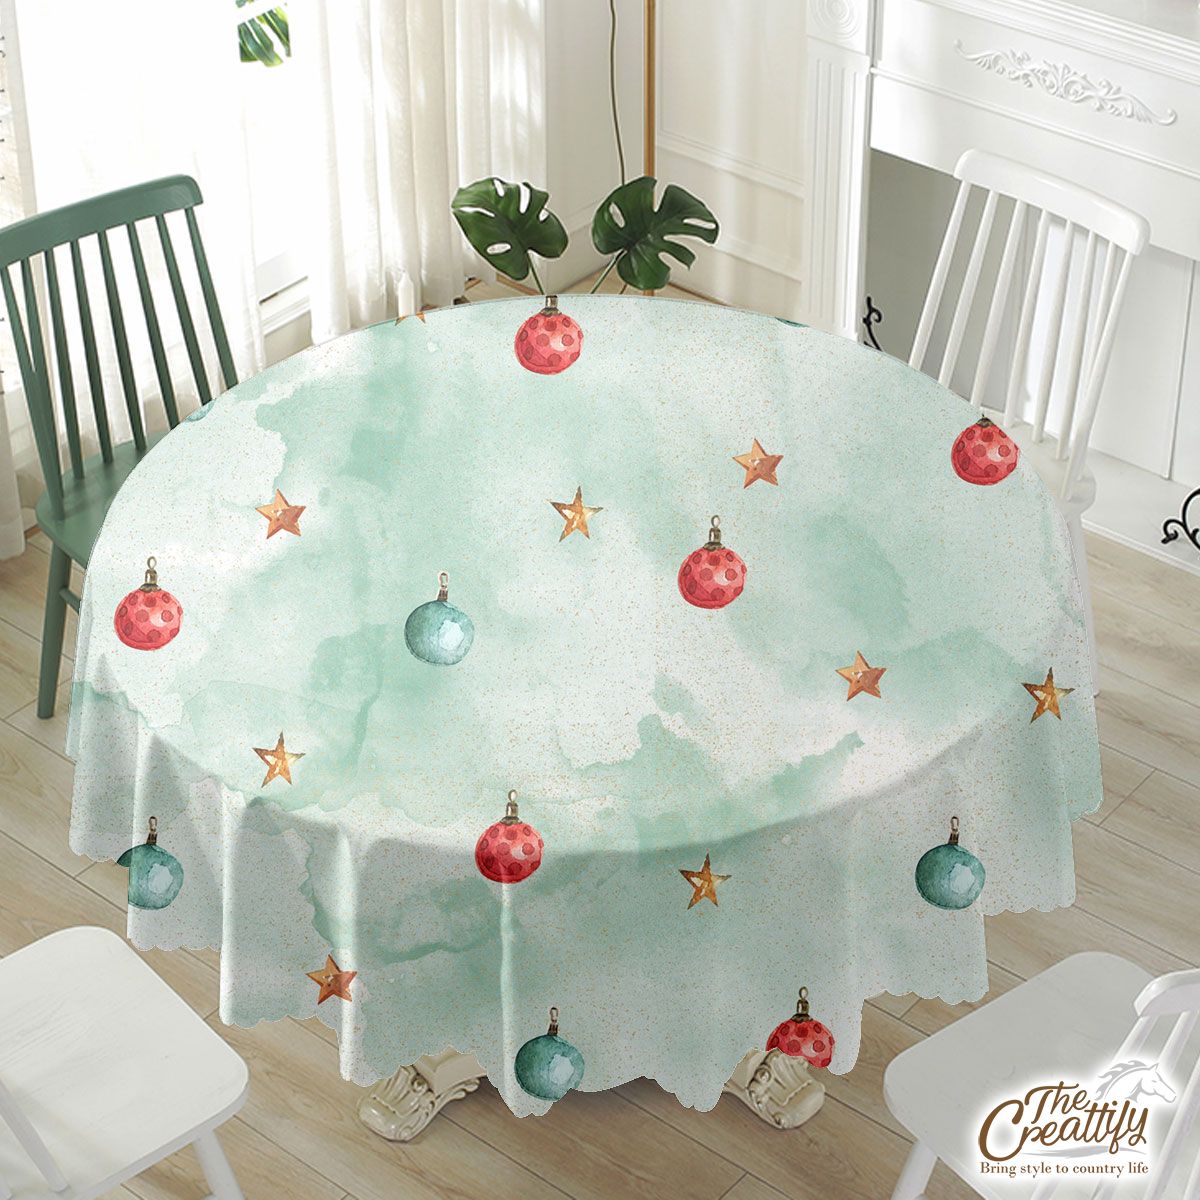 Watercolor Christmas Balls And Stars Pattern Waterproof Tablecloth